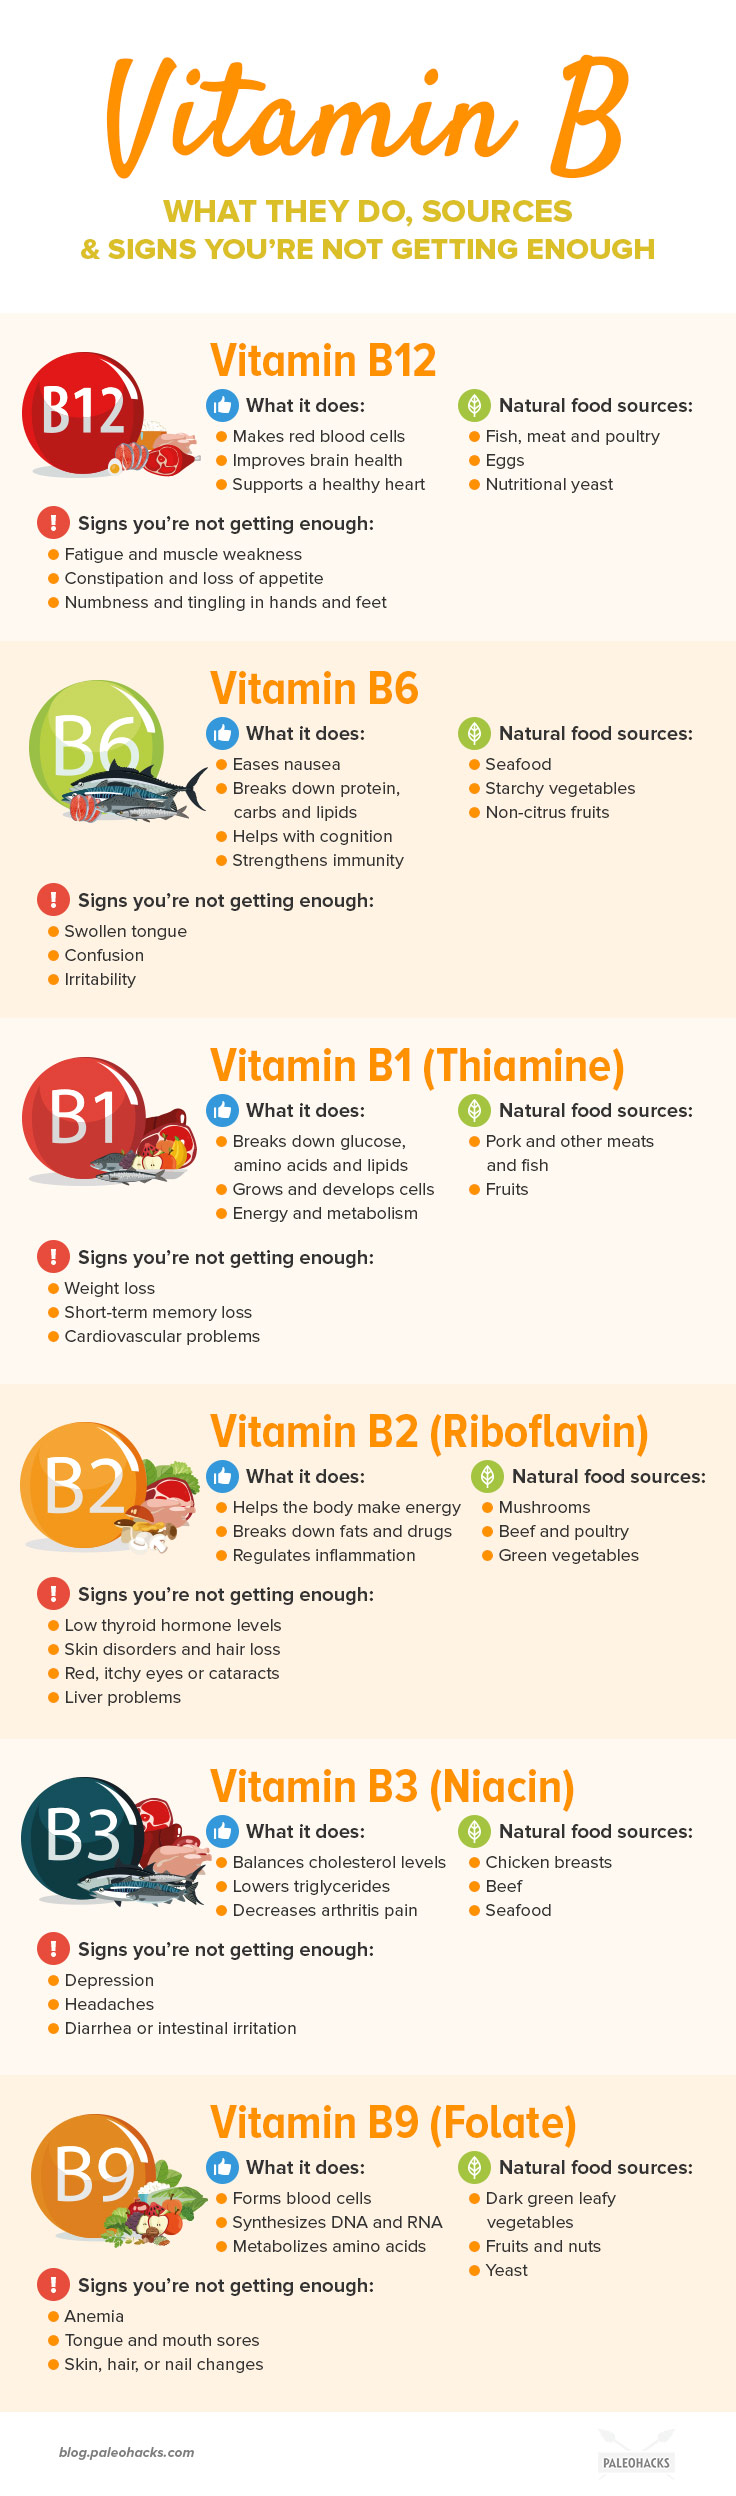 B vitamins are vital for your physical and mental health. Here’s a breakdown of this family of vitamins, and who is at risk for a deficiency.